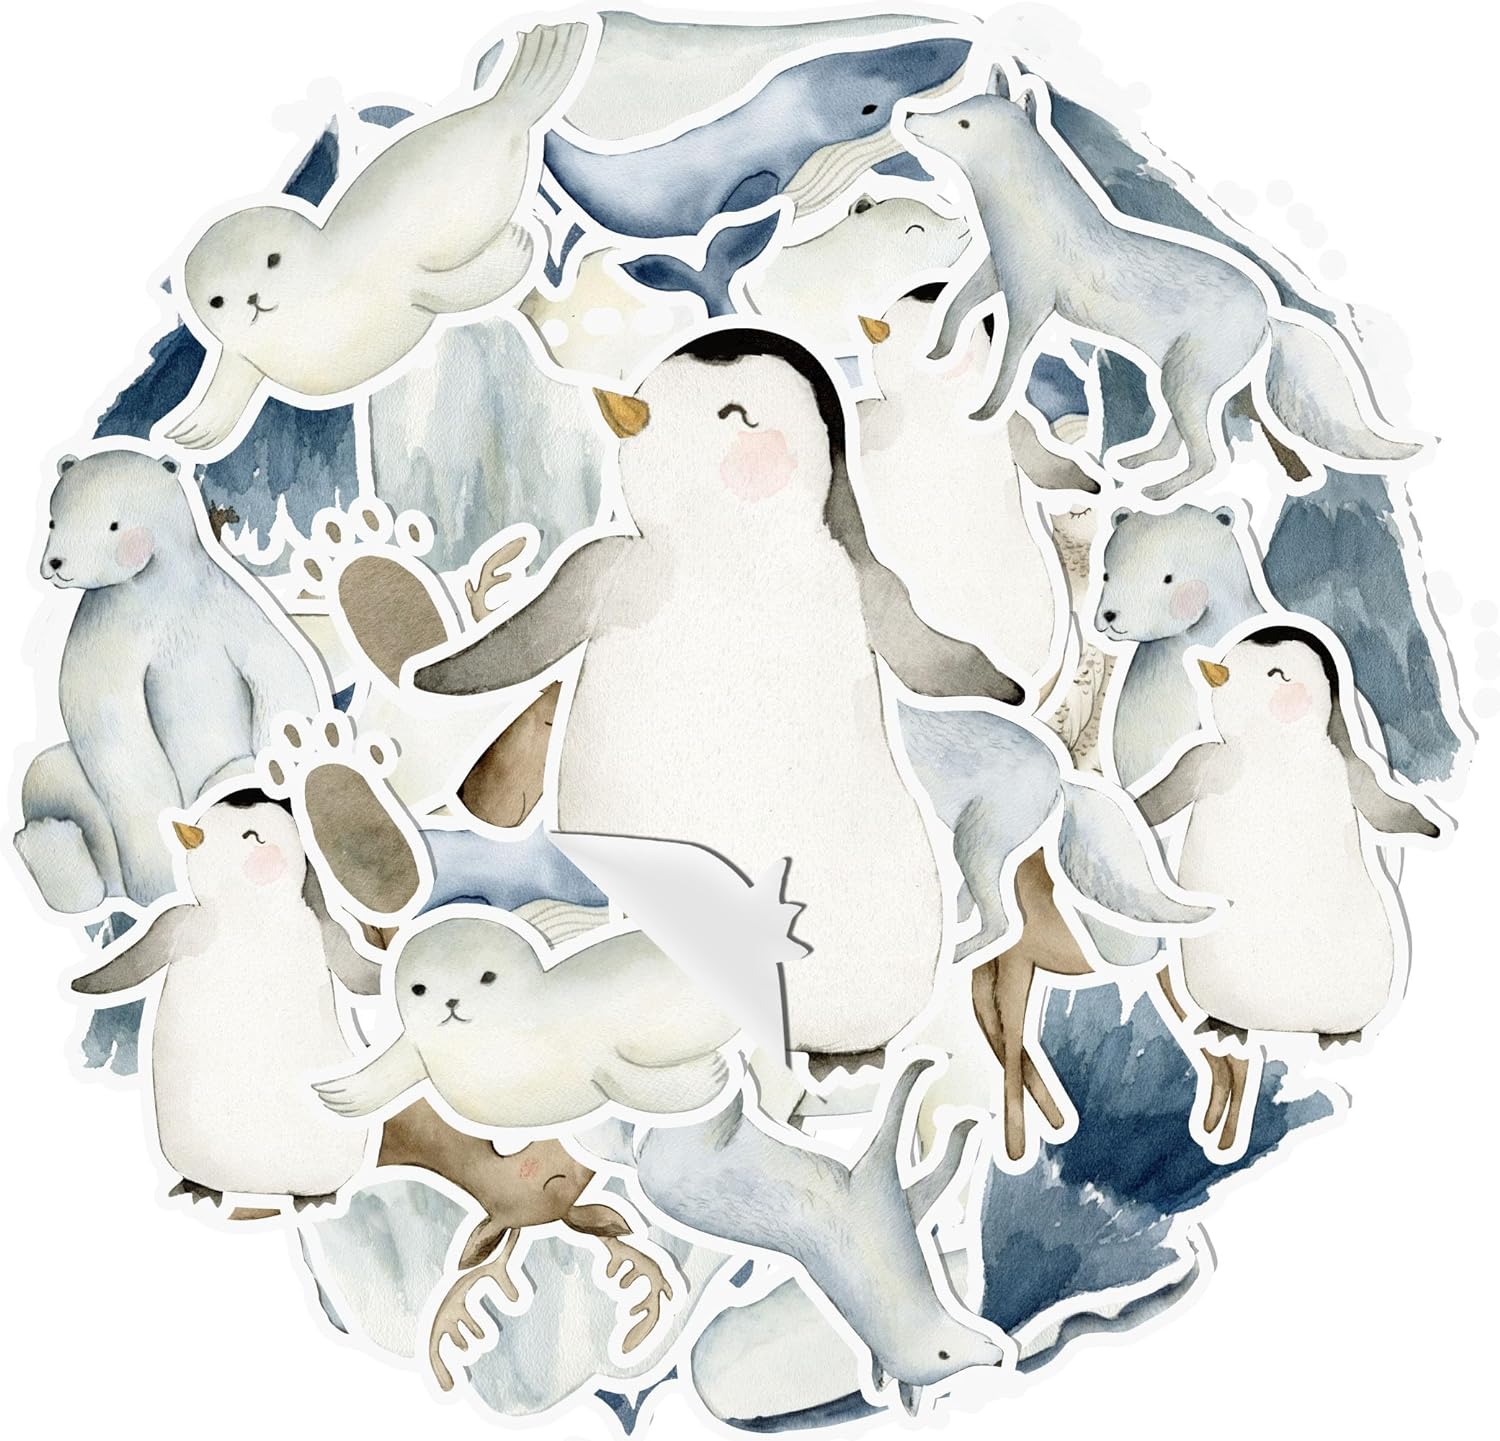 Arctic Friends Sticker 20 Pcs Pack - Charming Collection of Polar Animal Stickers for Creative Fun and Decoration